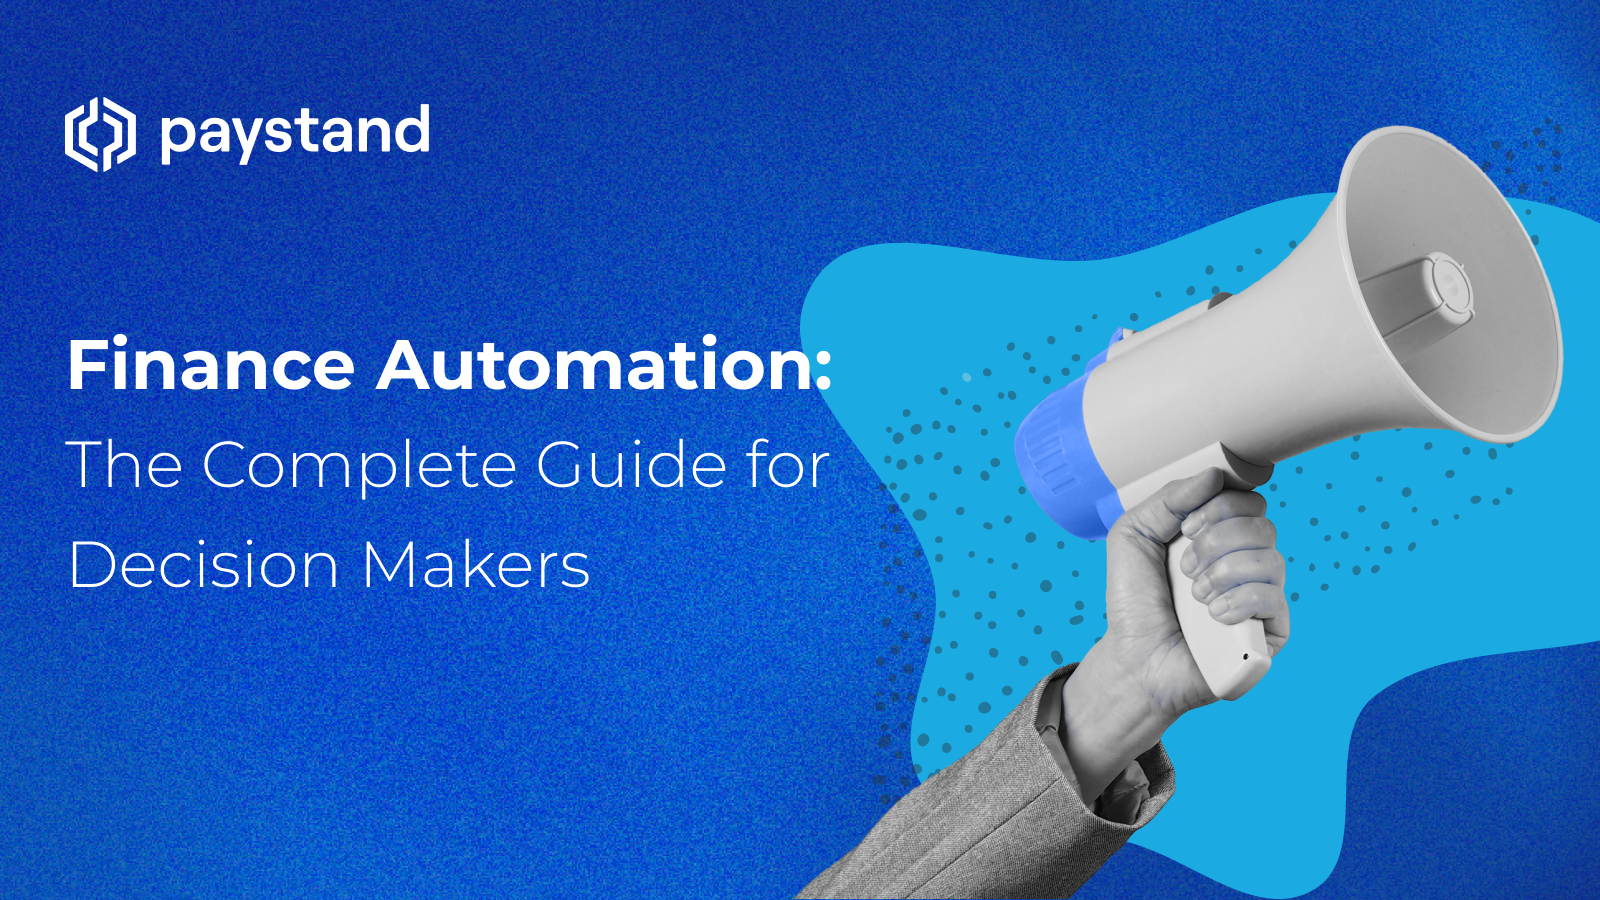 Finance Automation: The Complete Guide for Decision Makers